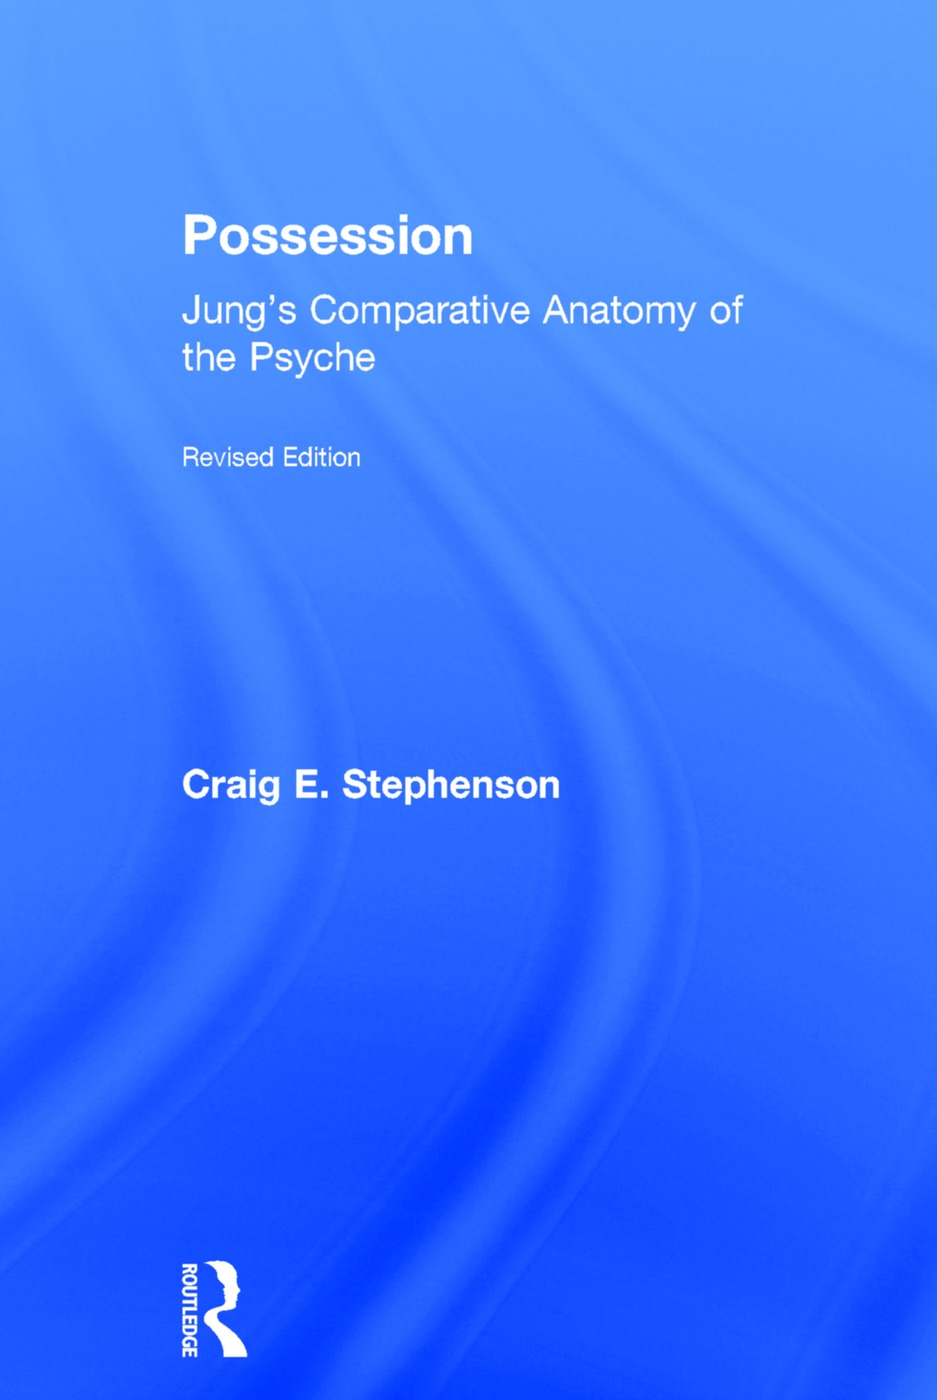 Possession: Jung’s Comparative Anatomy of the Psyche